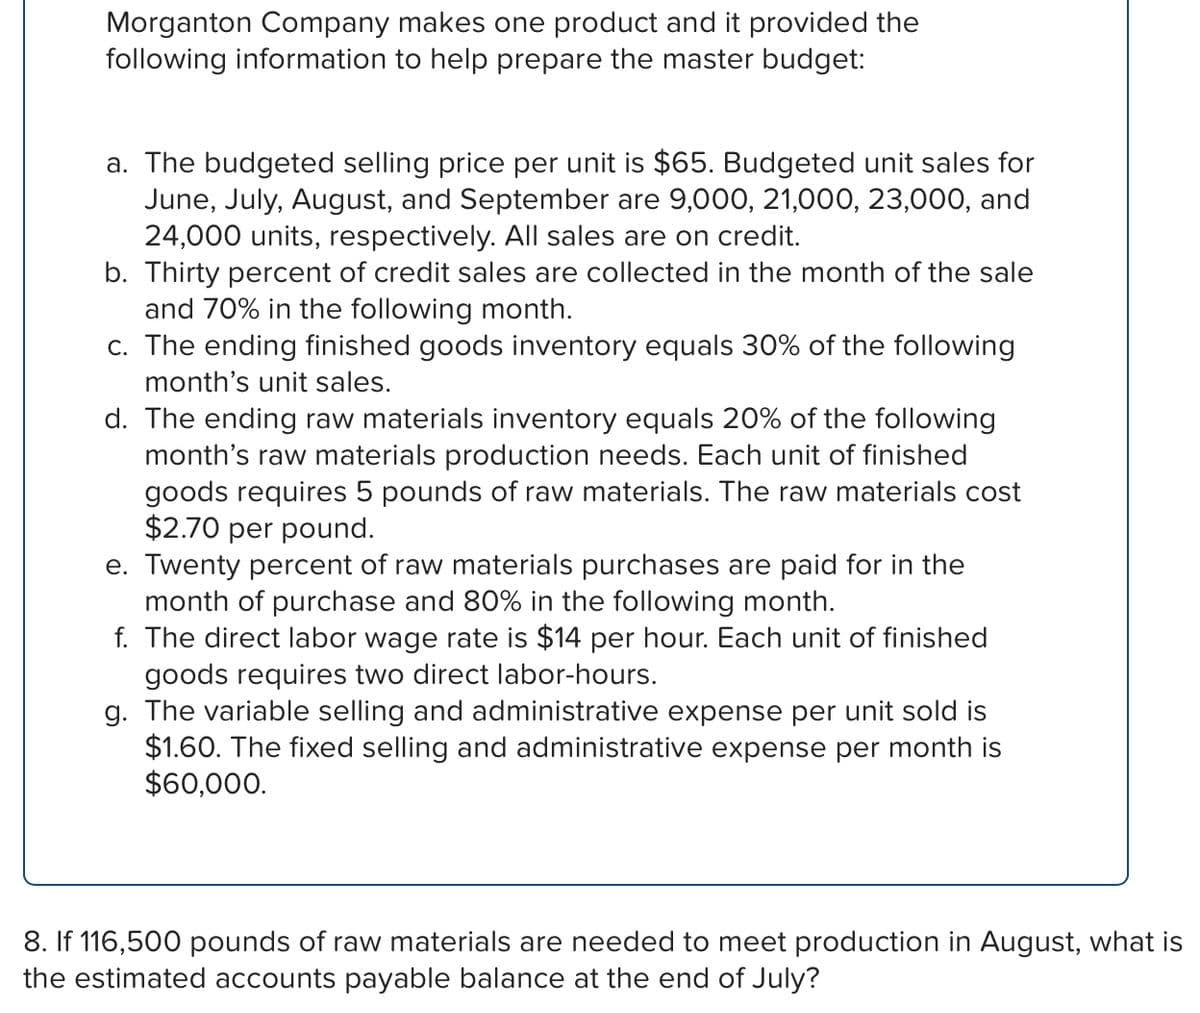 Morganton Company makes one product and it provided the
following information to help prepare the master budget:
a. The budgeted selling price per unit is $65. Budgeted unit sales for
June, July, August, and September are 9,000, 21,000, 23,000, and
24,000 units, respectively. All sales are on credit.
b. Thirty percent of credit sales are collected in the month of the sale
and 70% in the following month.
c. The ending finished goods inventory equals 30% of the following
month's unit sales.
d. The ending raw materials inventory equals 20% of the following
month's raw materials production needs. Each unit of finished
goods requires 5 pounds of raw materials. The raw materials cost
$2.70 per pound.
e. Twenty percent of raw materials purchases are paid for in the
month of purchase and 80% in the following month.
f. The direct labor wage rate is $14 per hour. Each unit of finished
goods requires two direct labor-hours.
g. The variable selling and administrative expense per unit sold is
$1.60. The fixed selling and administrative expense per month is
$60,000.
8. If 116,500 pounds of raw materials are needed to meet production in August, what is
the estimated accounts payable balance at the end of July?